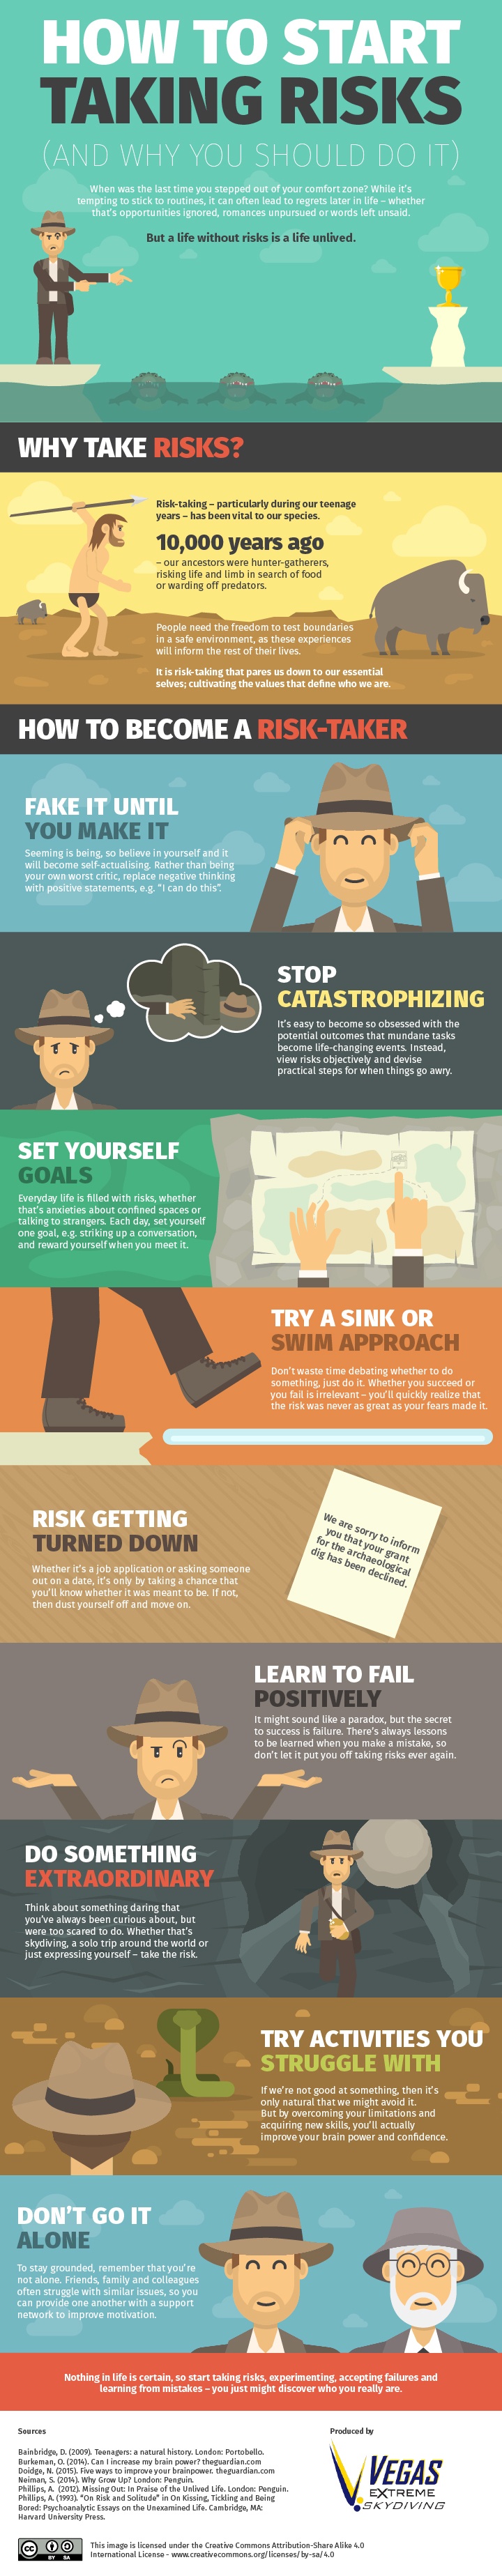 How to Start Taking Risks Infographic